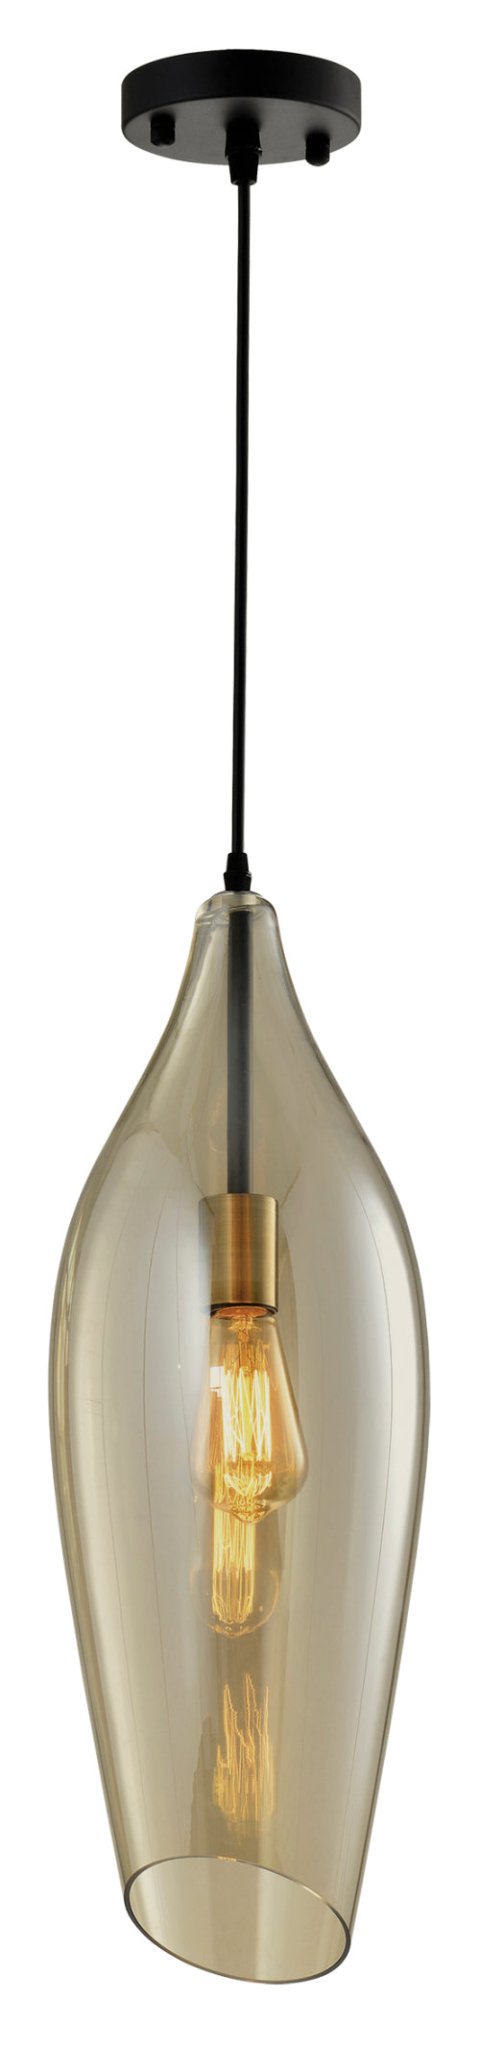 Black Metal Pendant with Cognac Colour Glass 1x 60W/11W ES (Not Included) - Lifespace